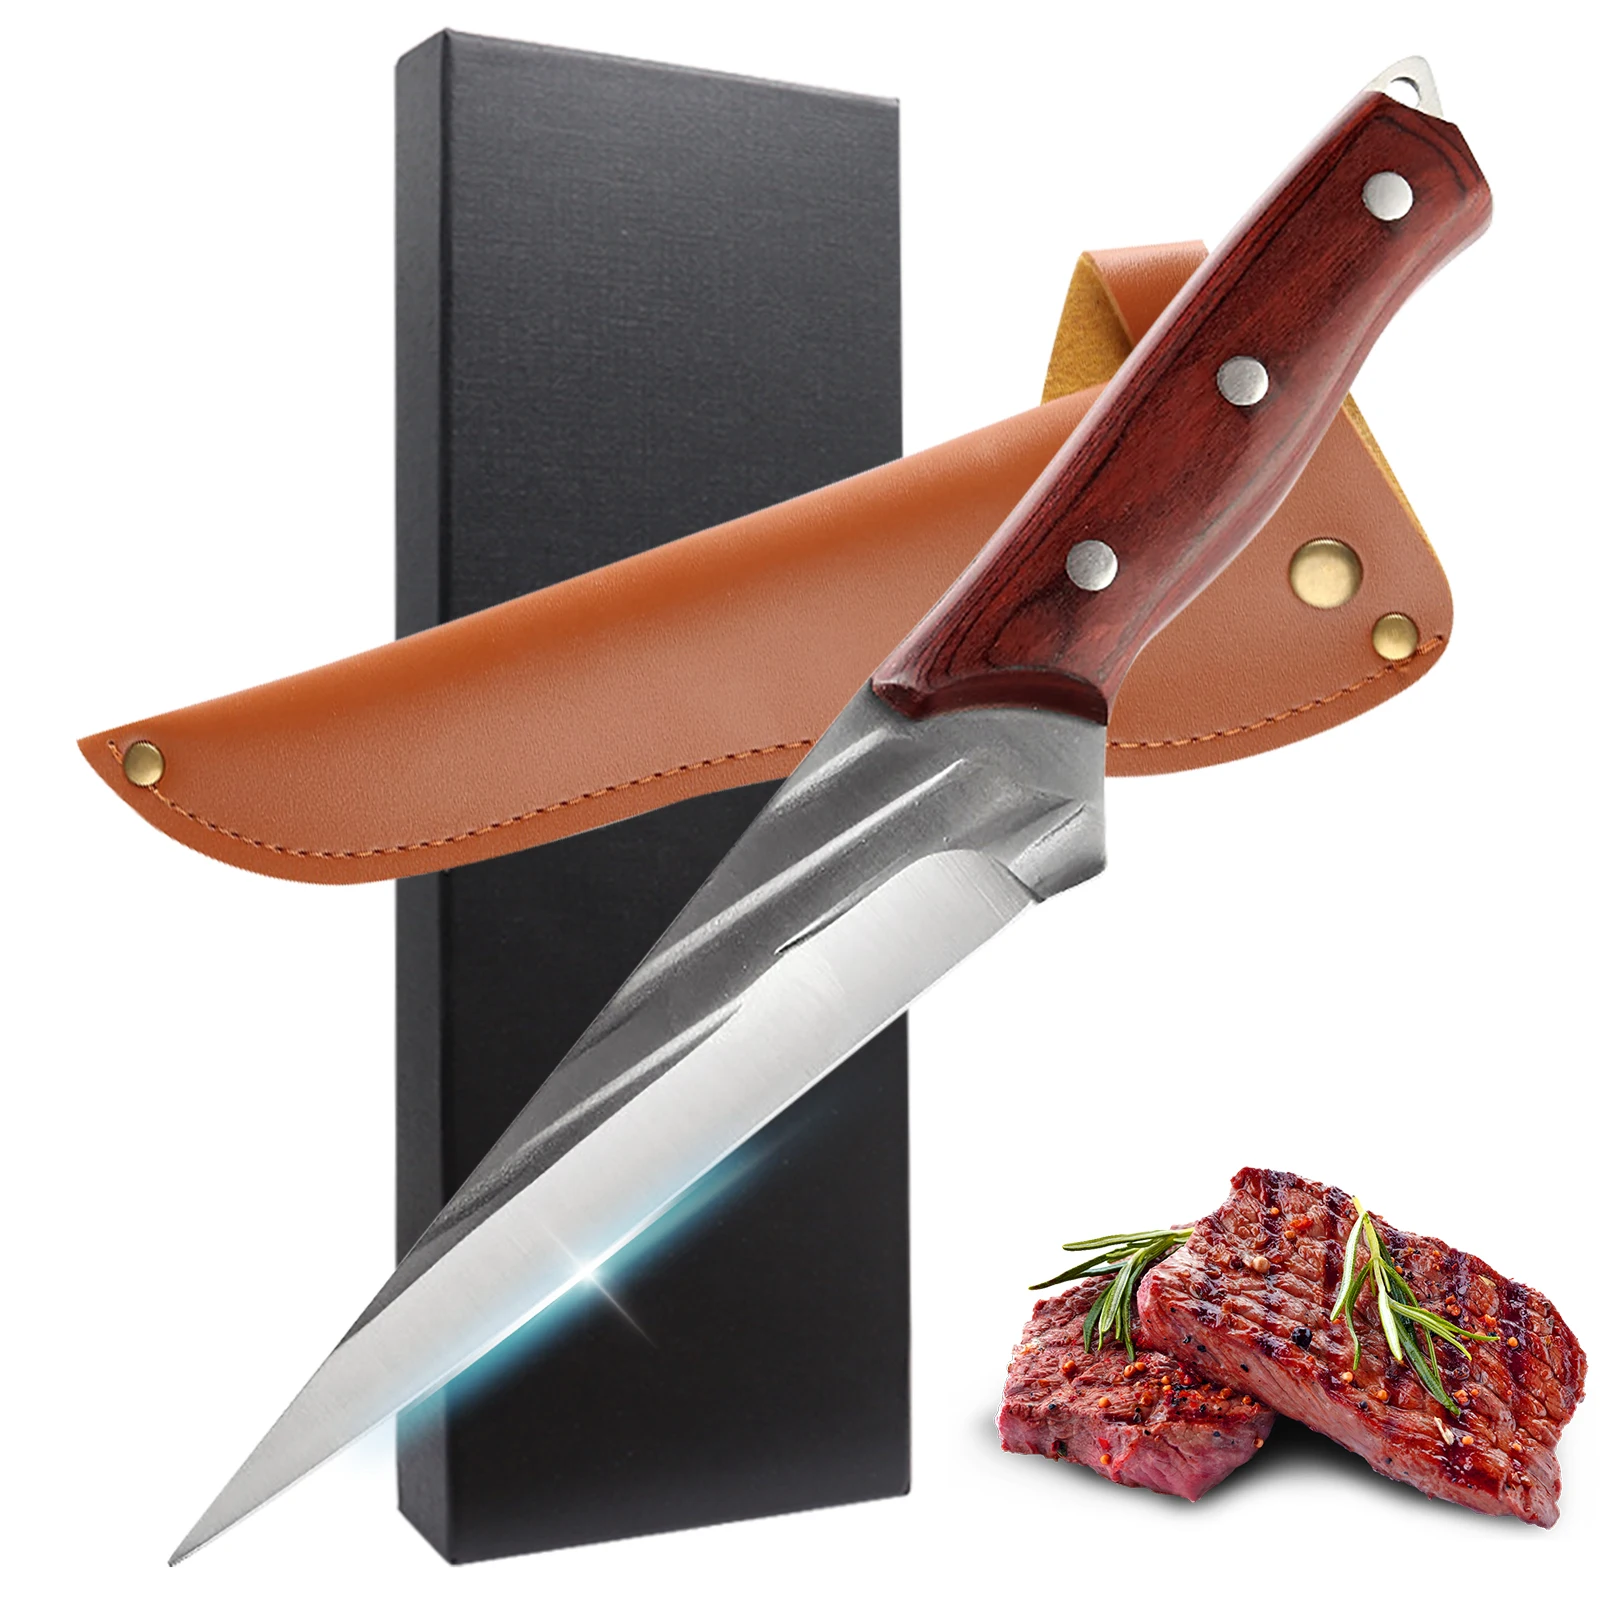 

Forged Boning Knife Pig Beef Sheep Cutting Carving Fishing Hunting Knife Purple Color Wood Sharp Barbecue Sushi Knife Mes